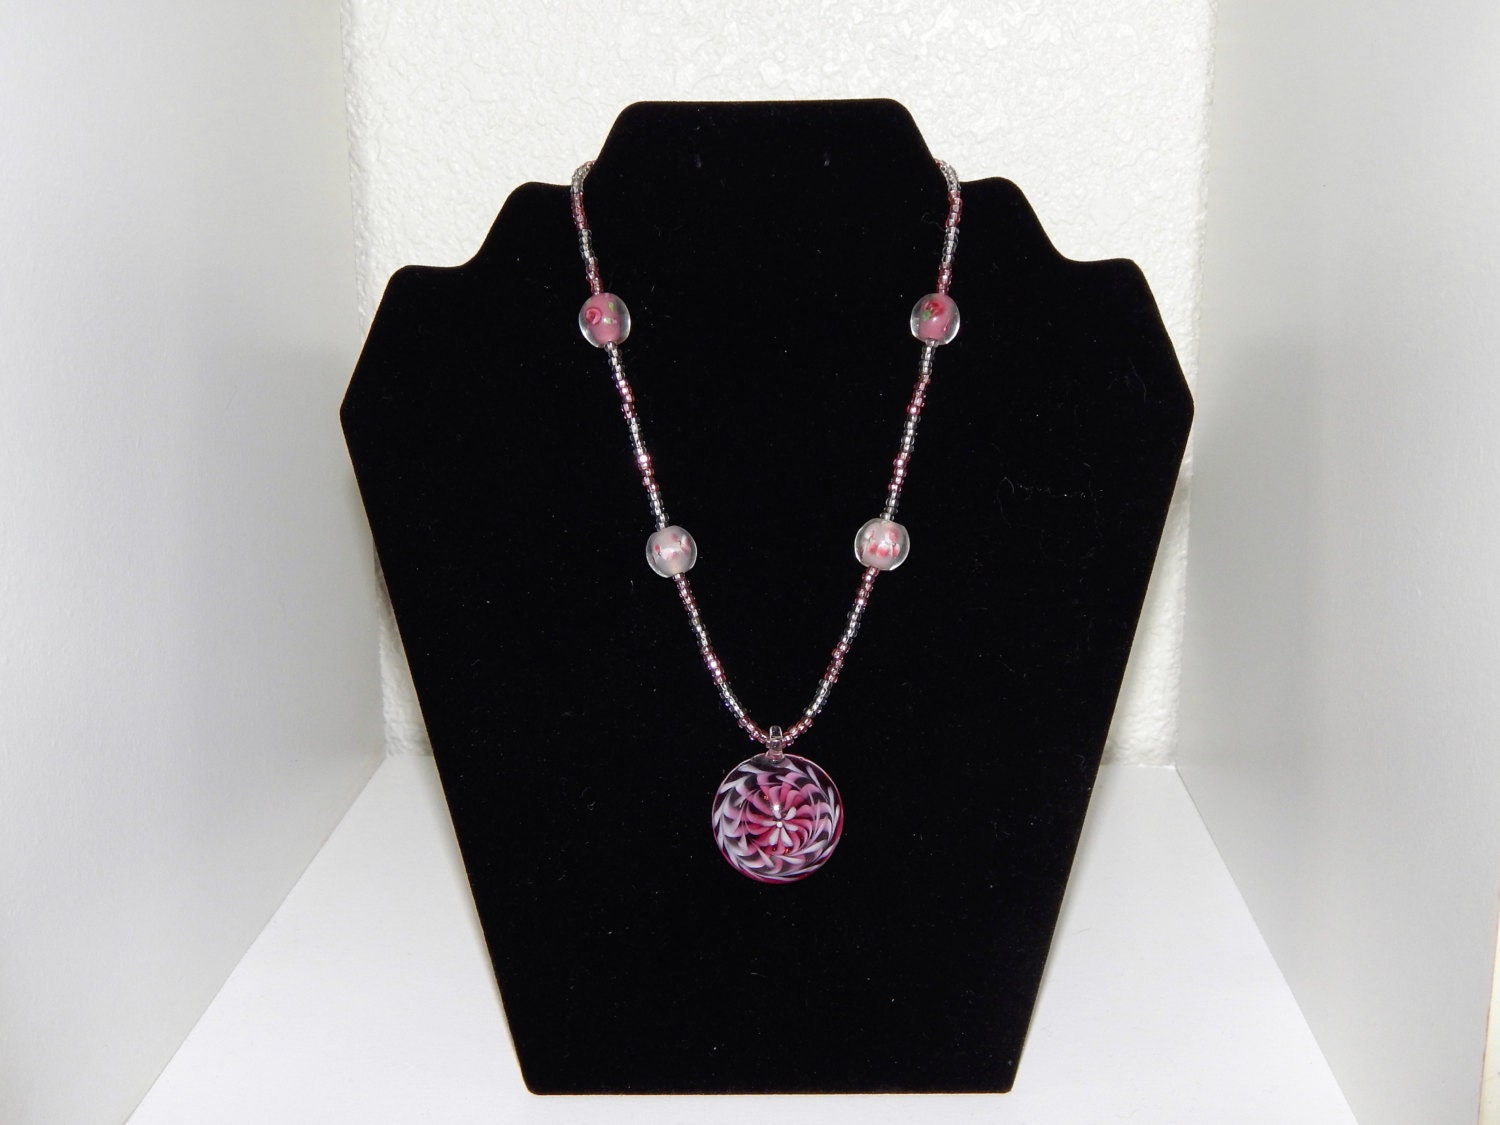 SALE 30% OFF Czech Pink/Silver Necklace with Lampwork